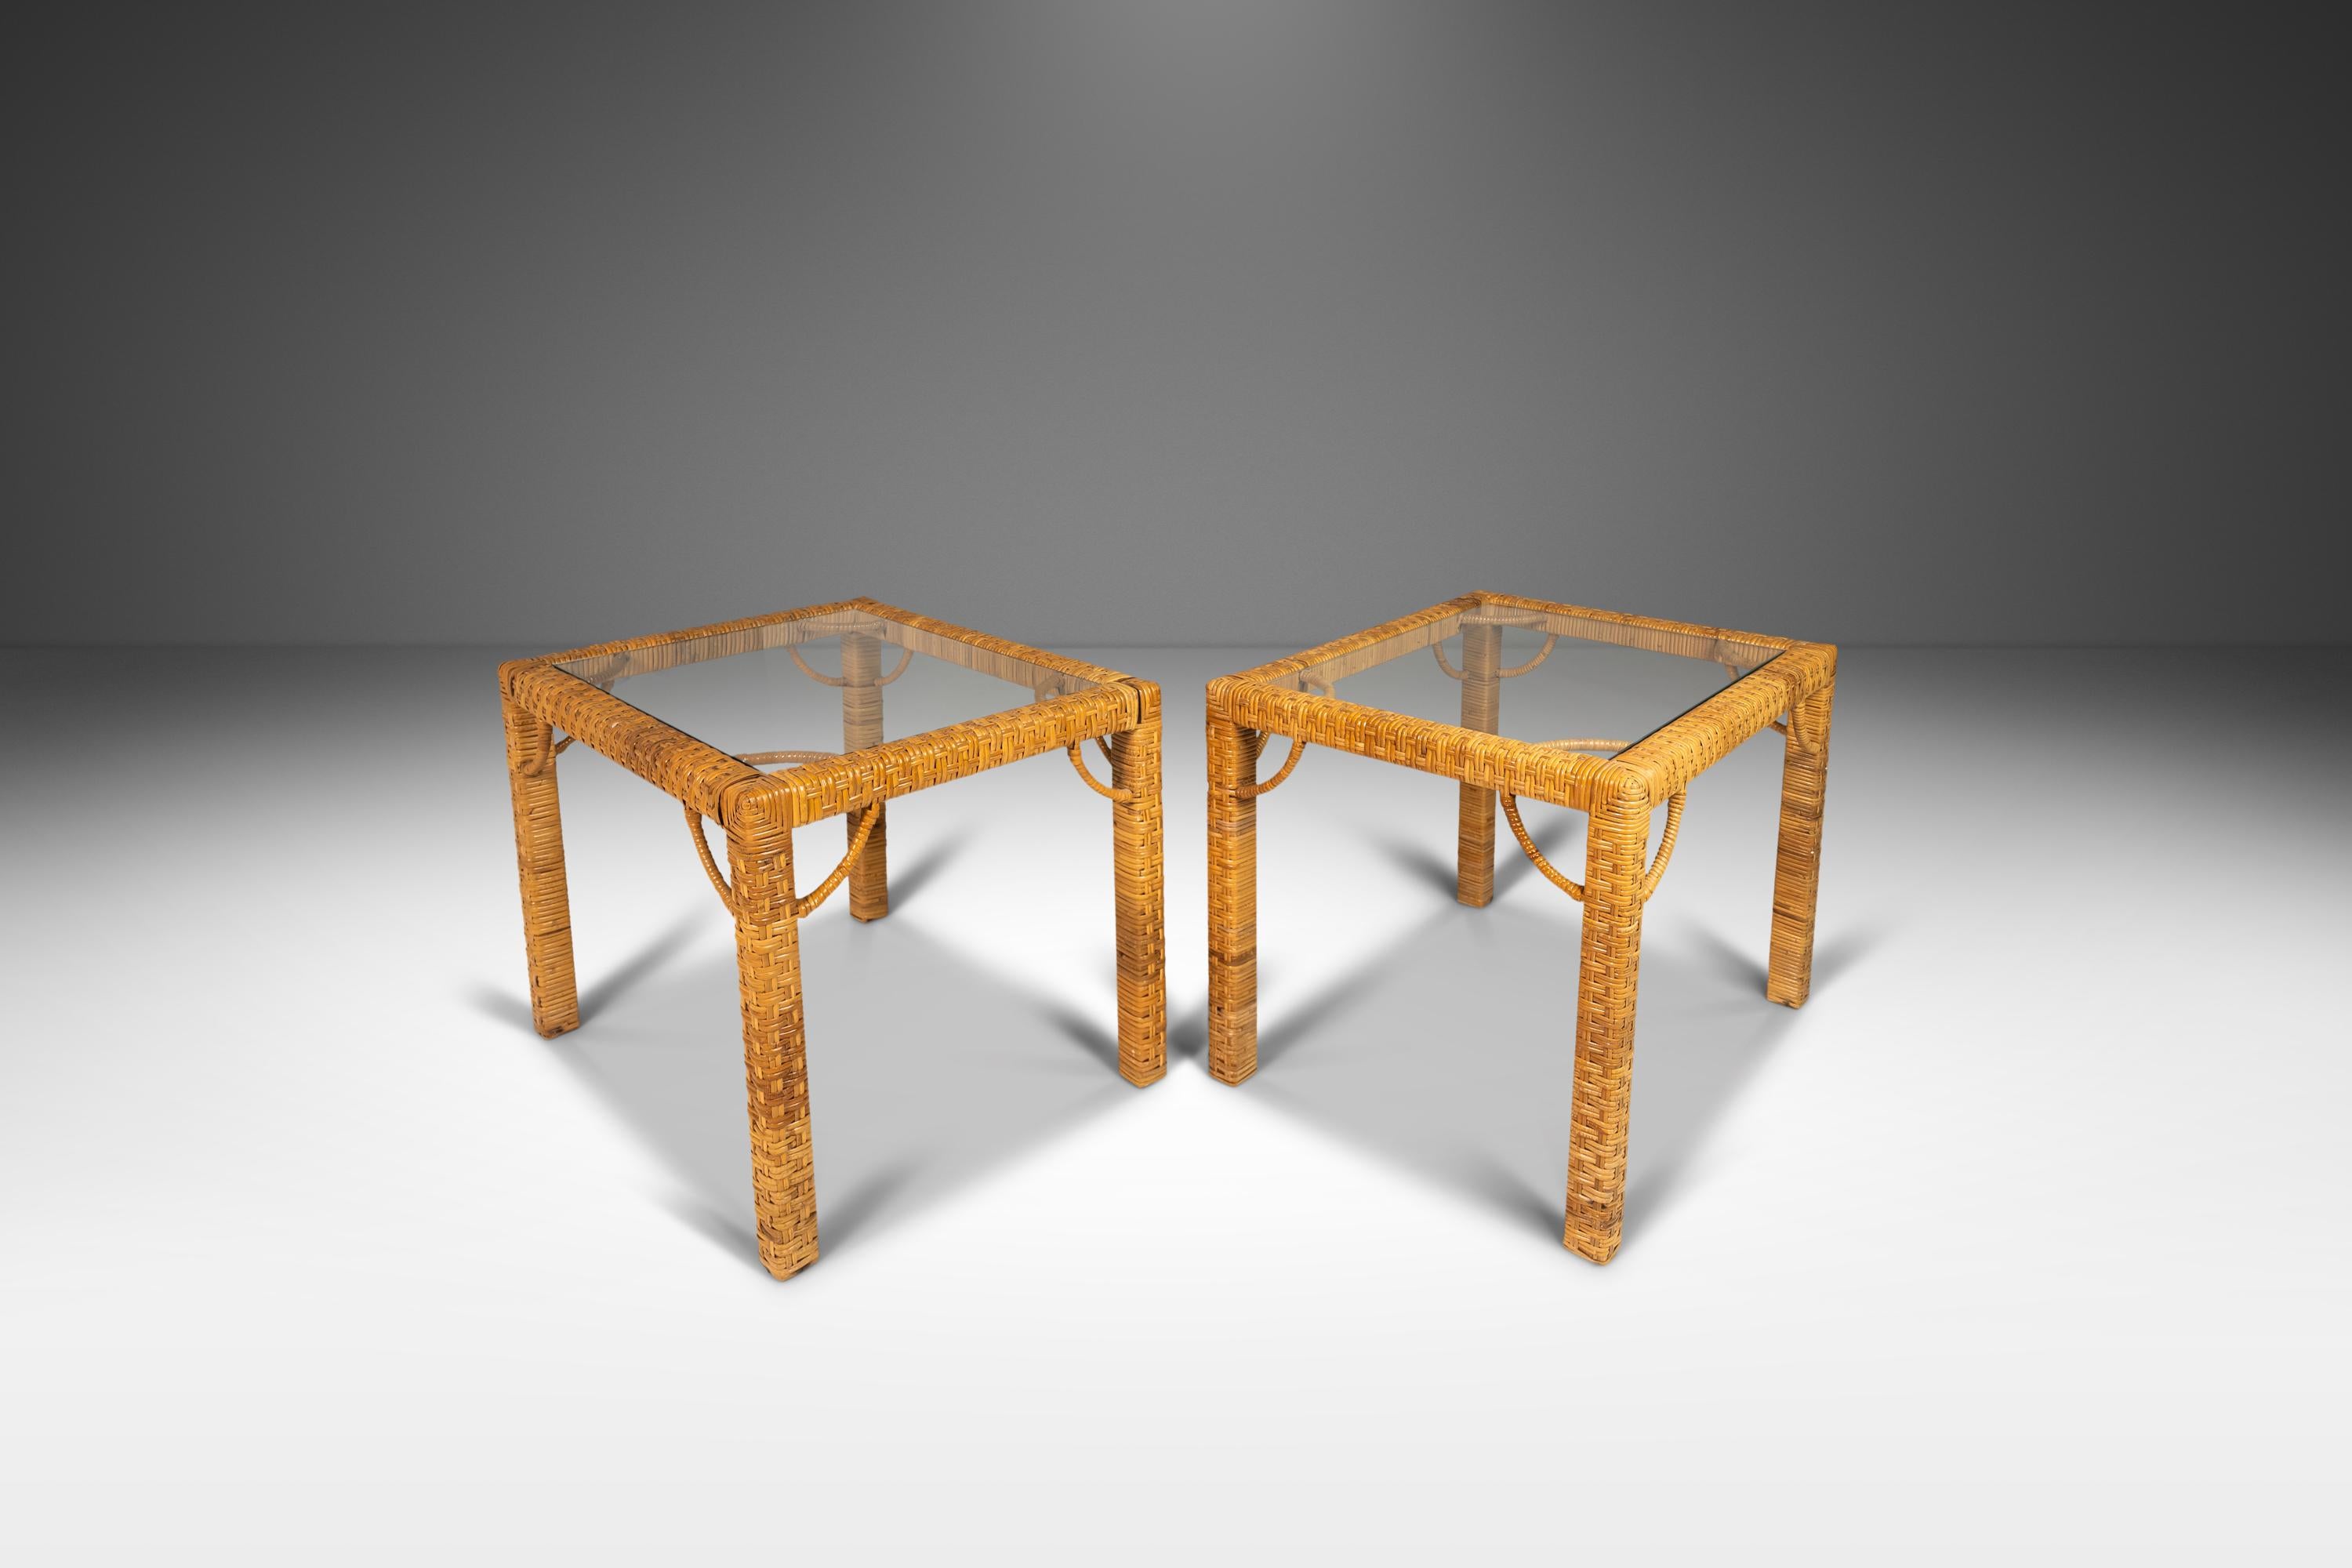 Offered for your consideration a set of two (2) Mid Century Modern End Tables that exude boho chic and bohemian vibes. These stunning pieces, attributed to Bieckley Brothers Rattan, are constructed with a cane wrapped design that is both